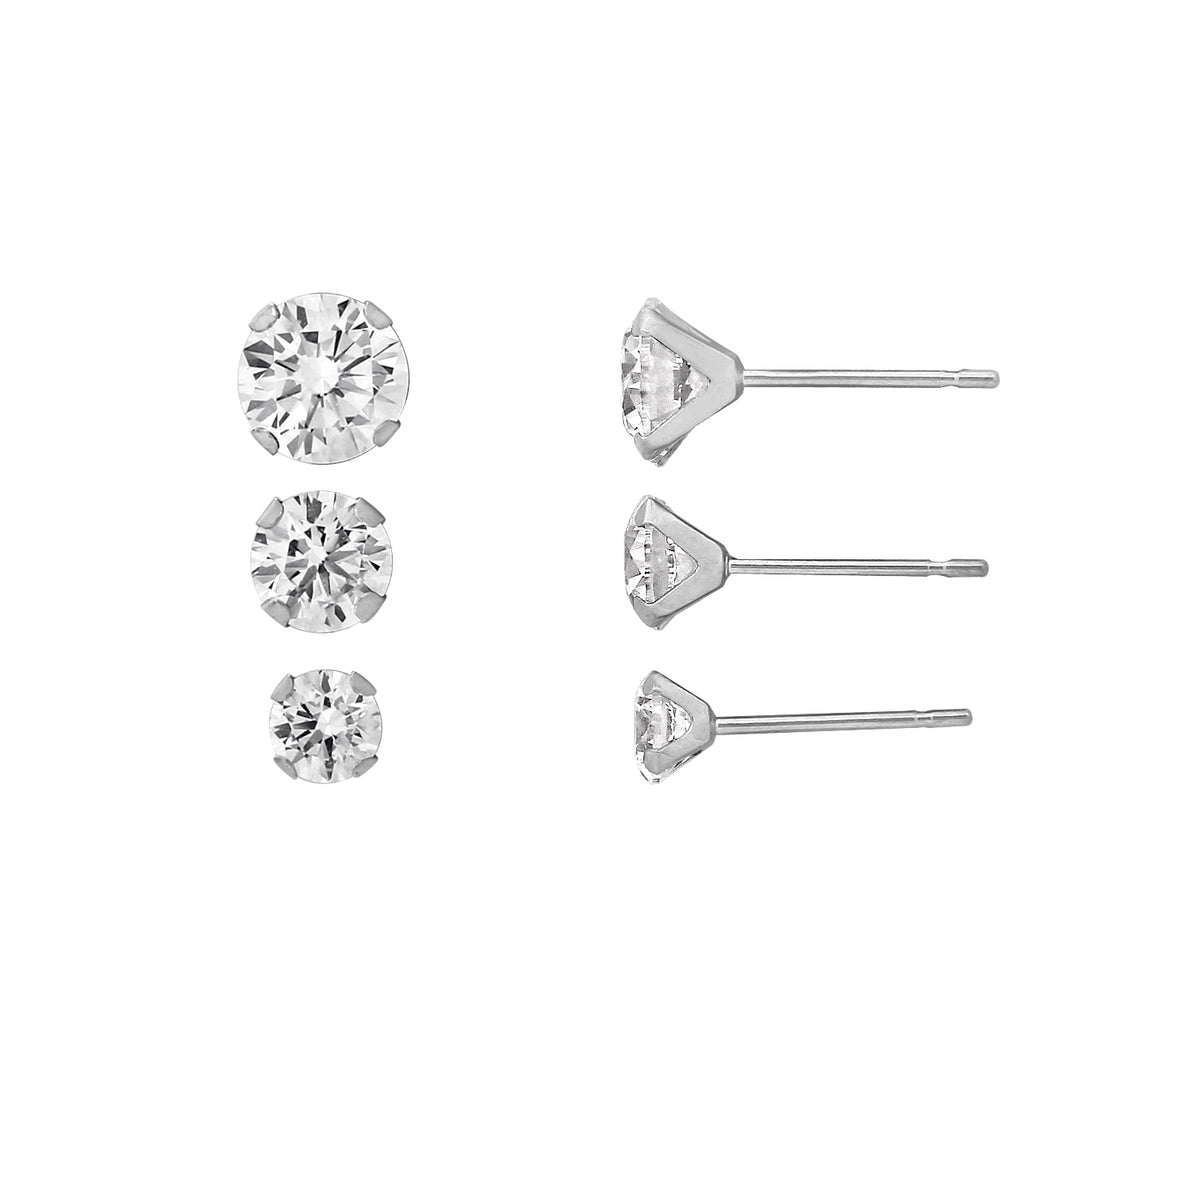 14K Solid White Gold Round Solitaire Stud Earrings Set